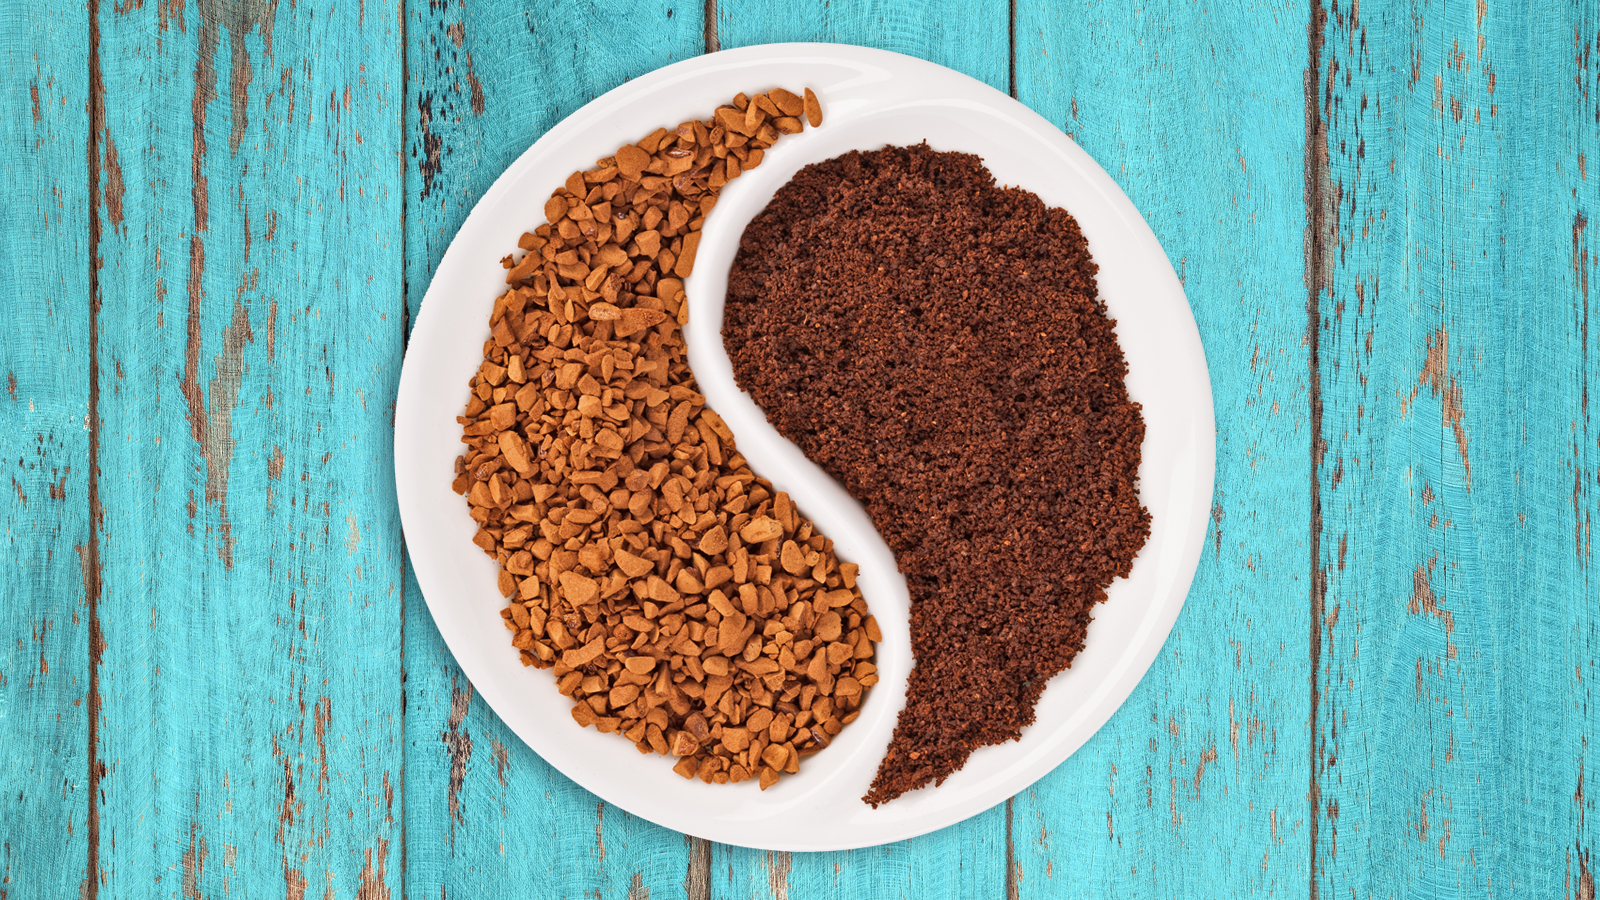 What is the difference between instant coffee and freshly ground coffee?